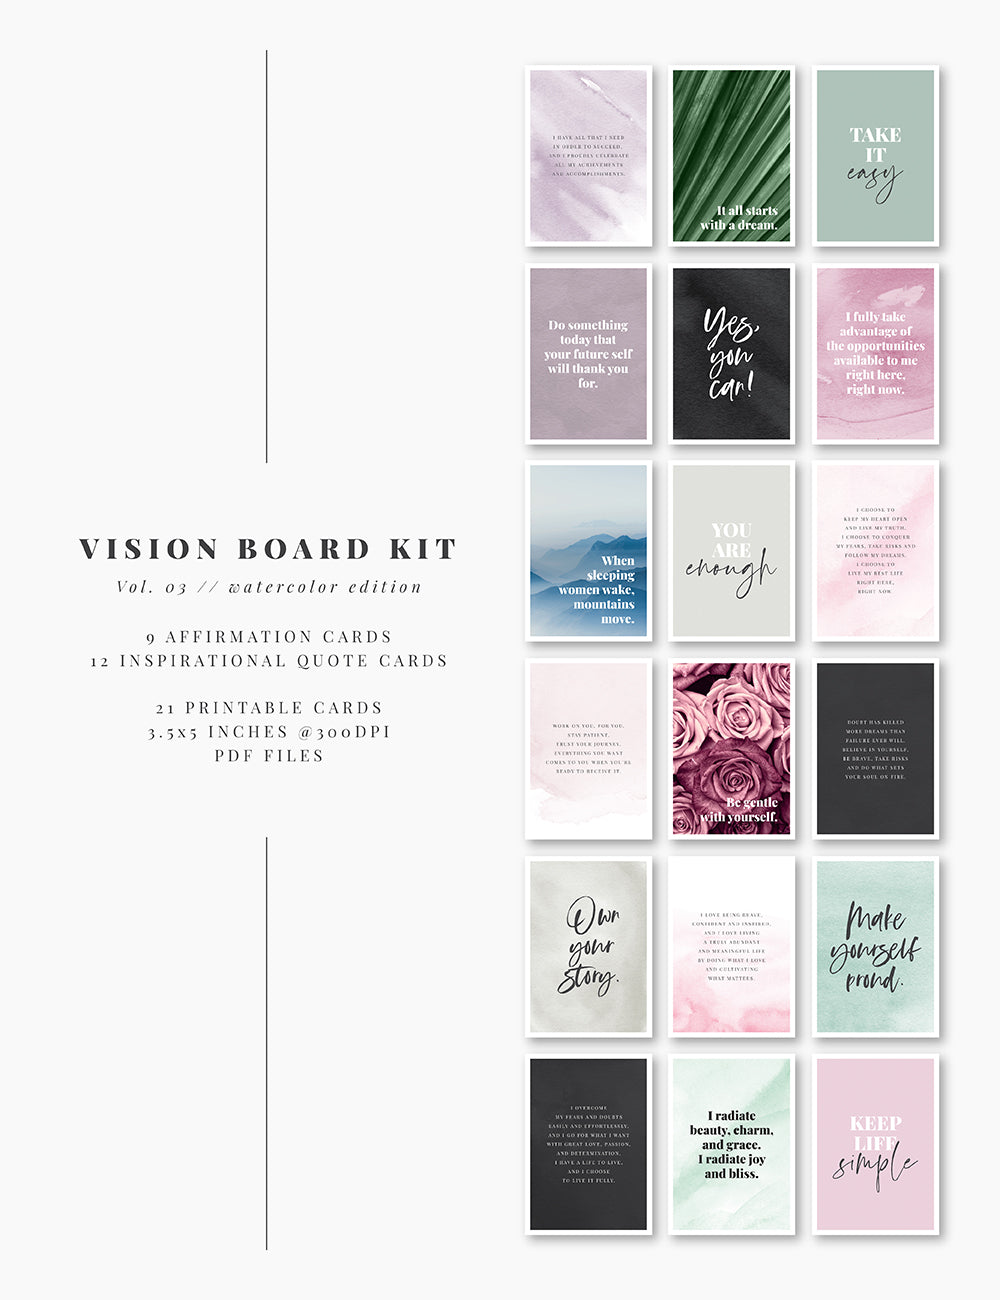 Vision Board Kit Motivational & Inspirational Tool To Remind You